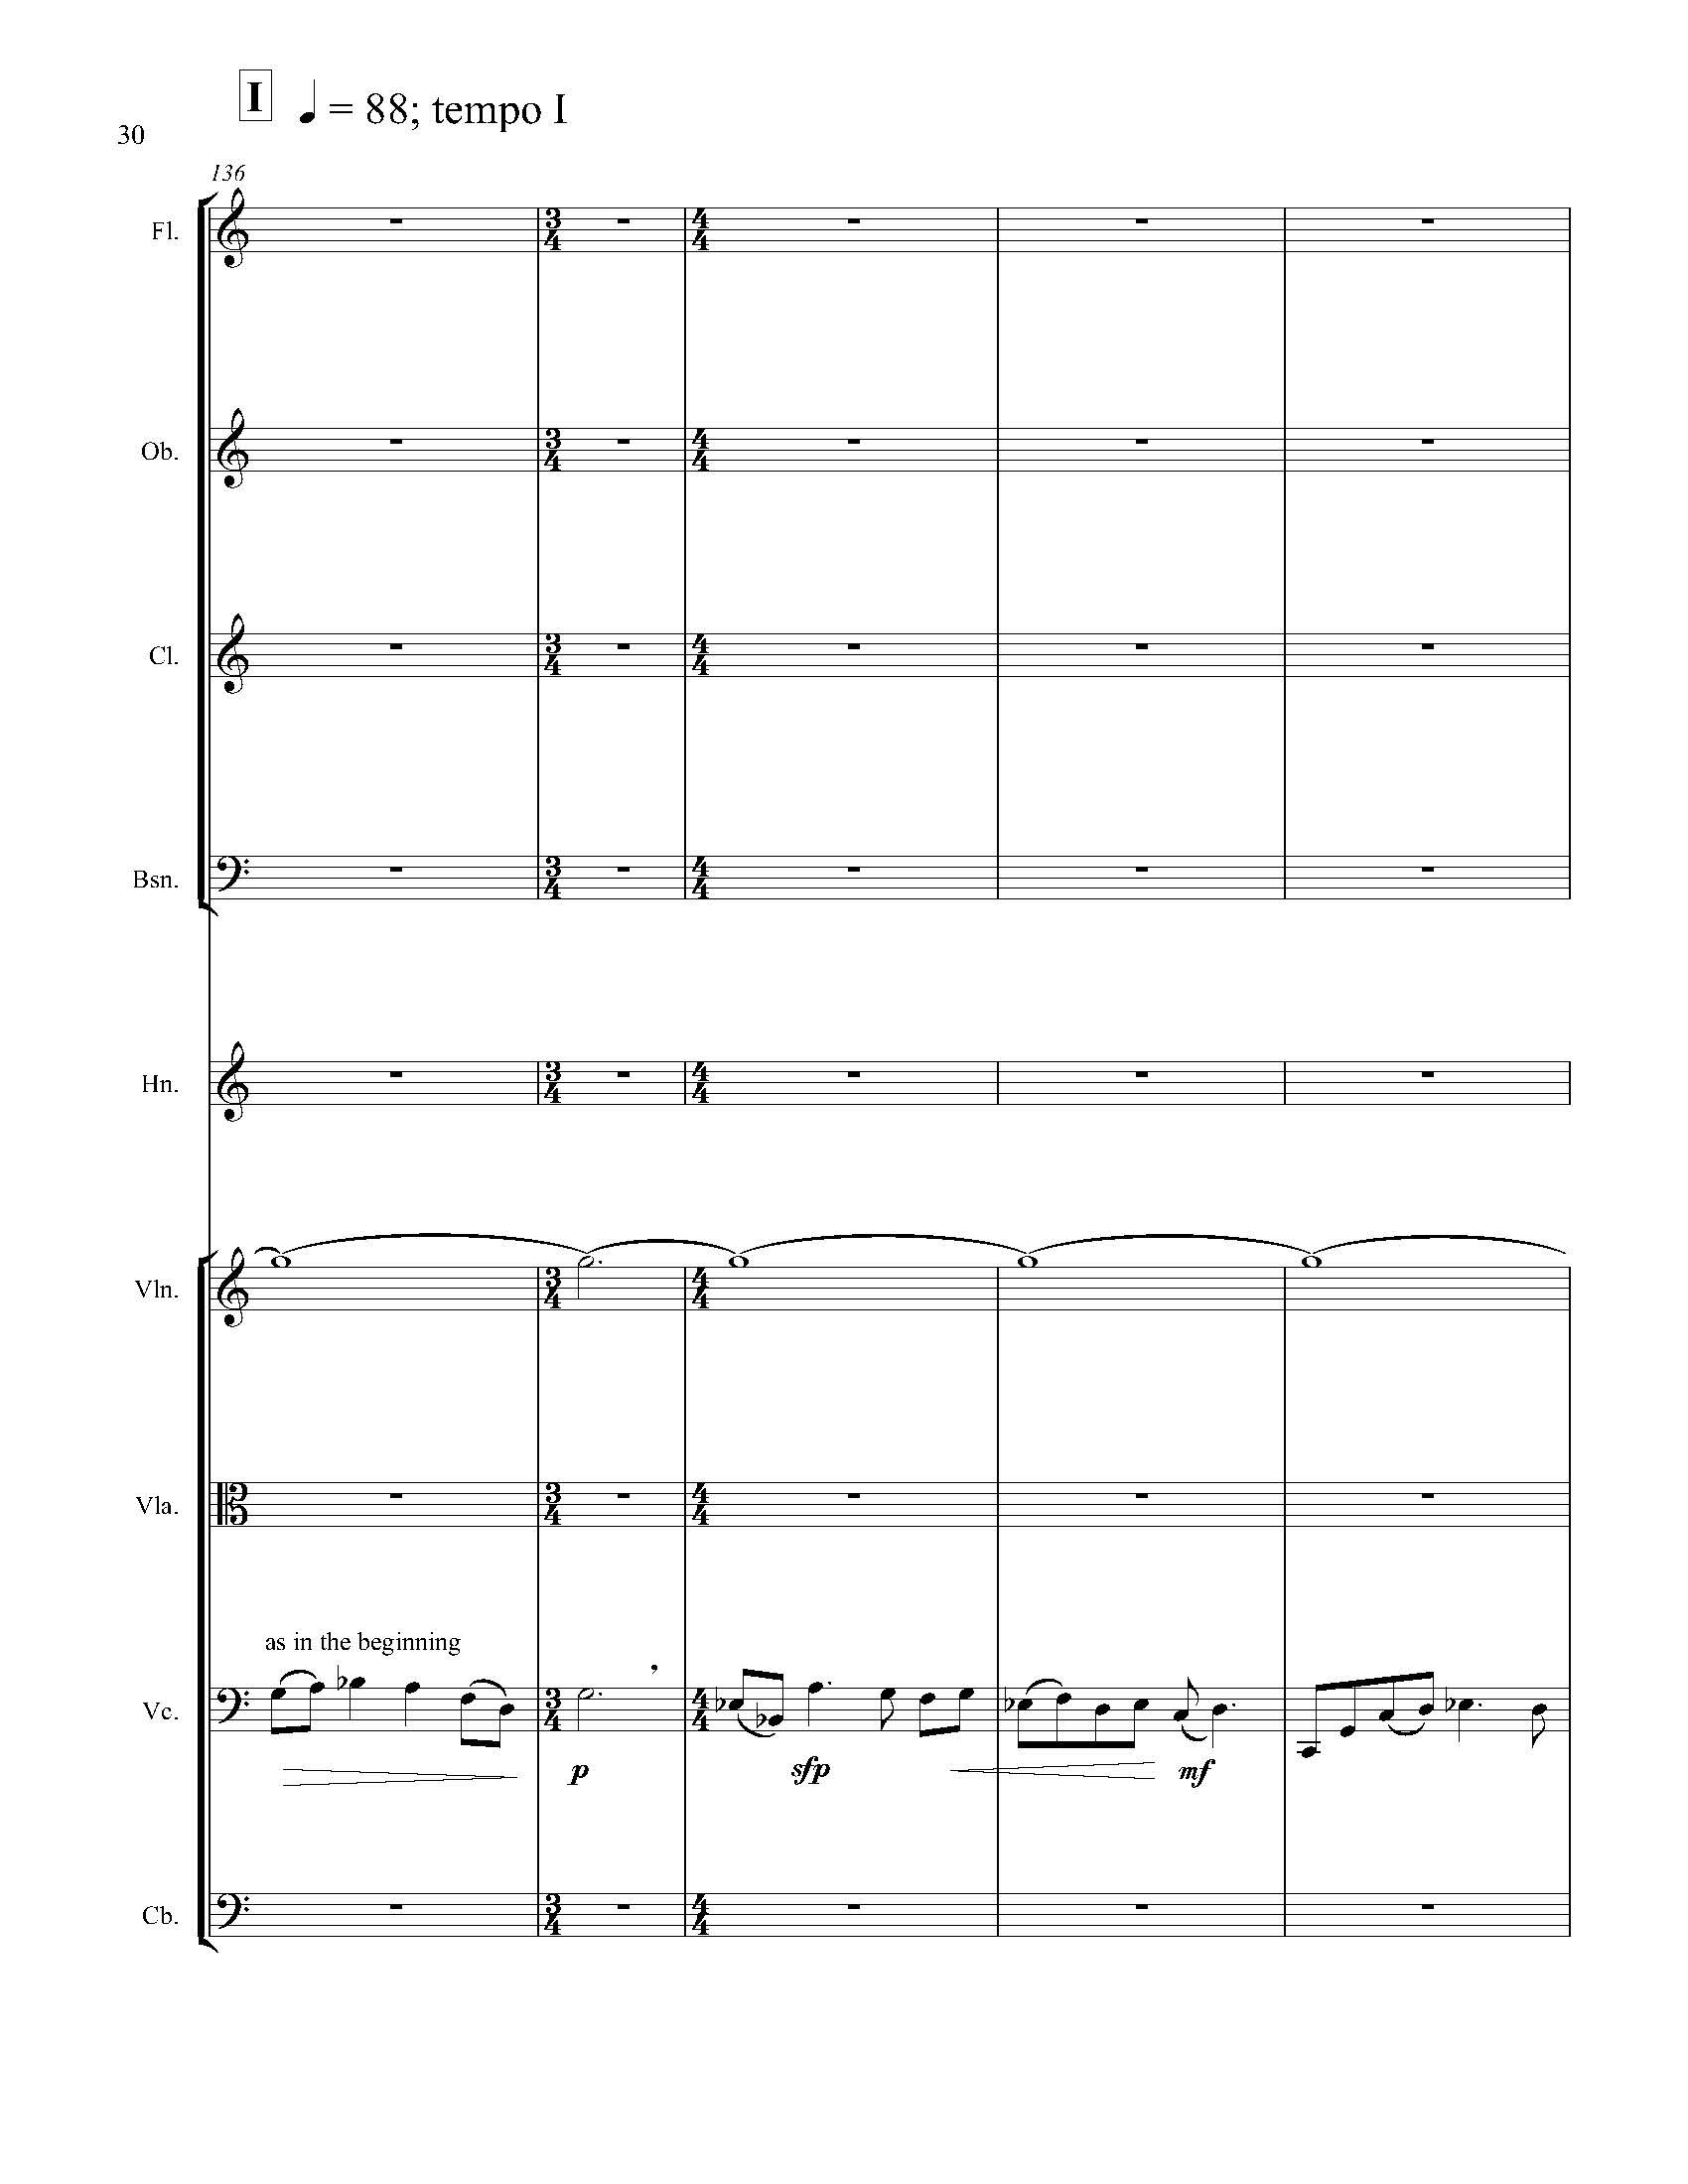 In Search of a Bird - Complete Score_Page_36.jpg